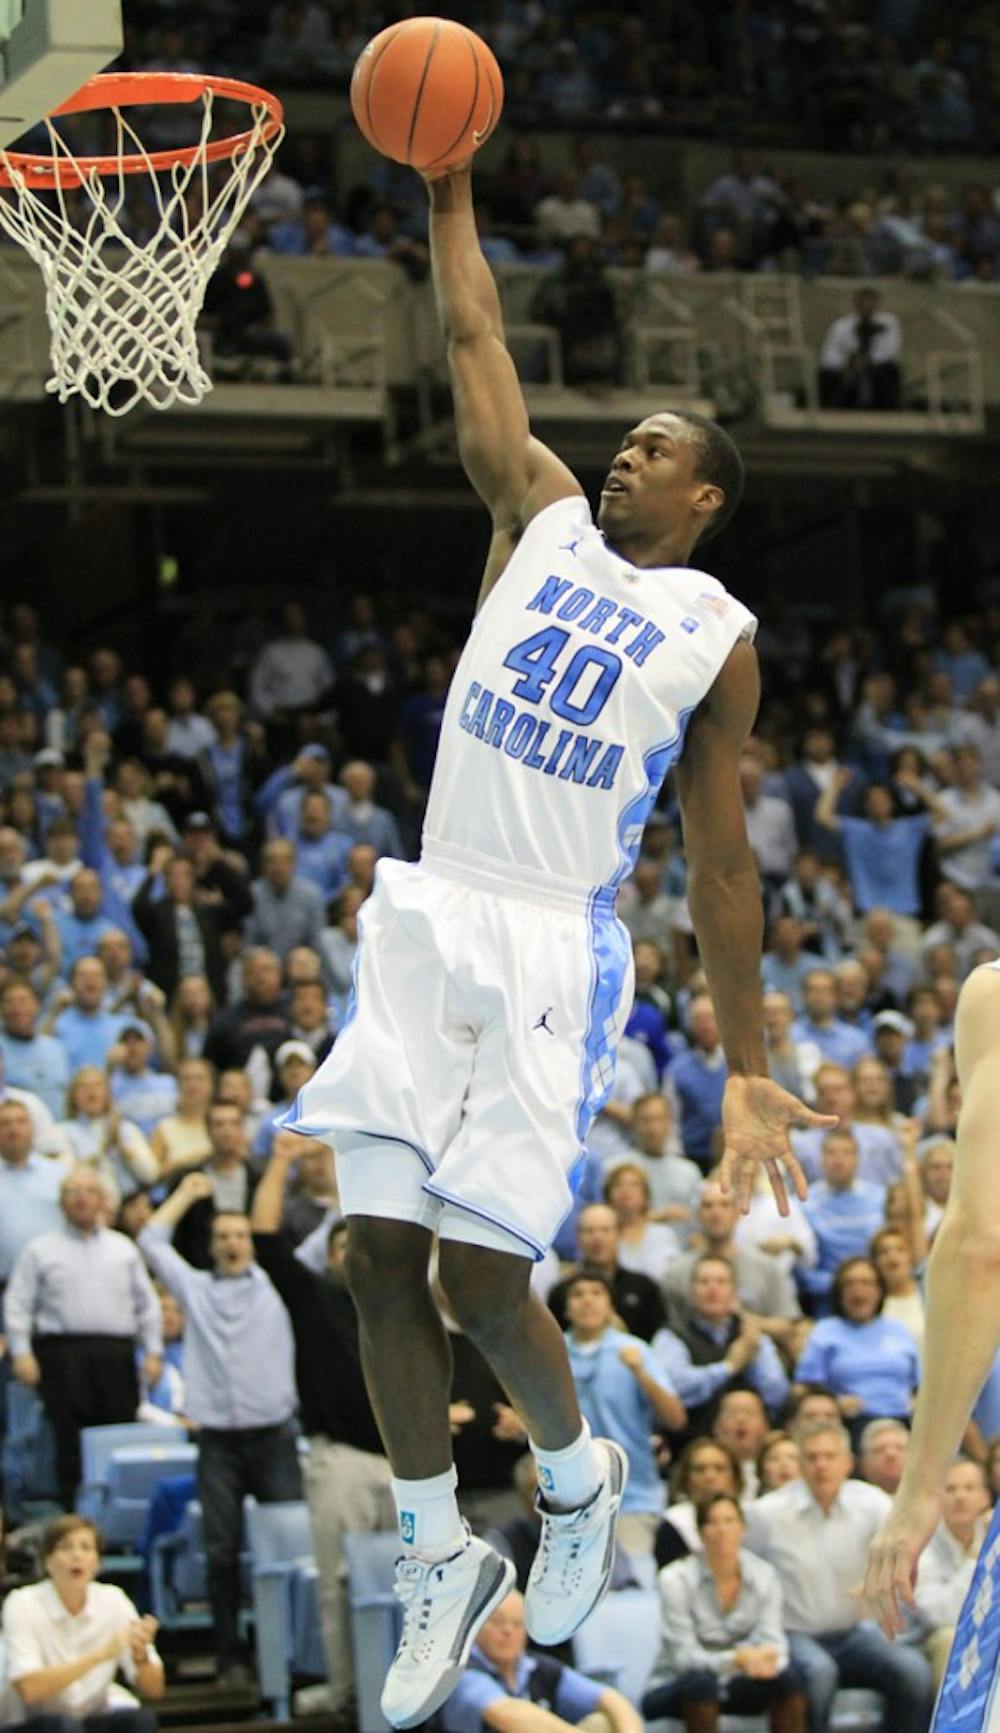 UNC’s Harrison Barnes goes up for a dunk in UNC’s 75-73 win against Kentucky. The preseason All-American finished the game with 12 points.